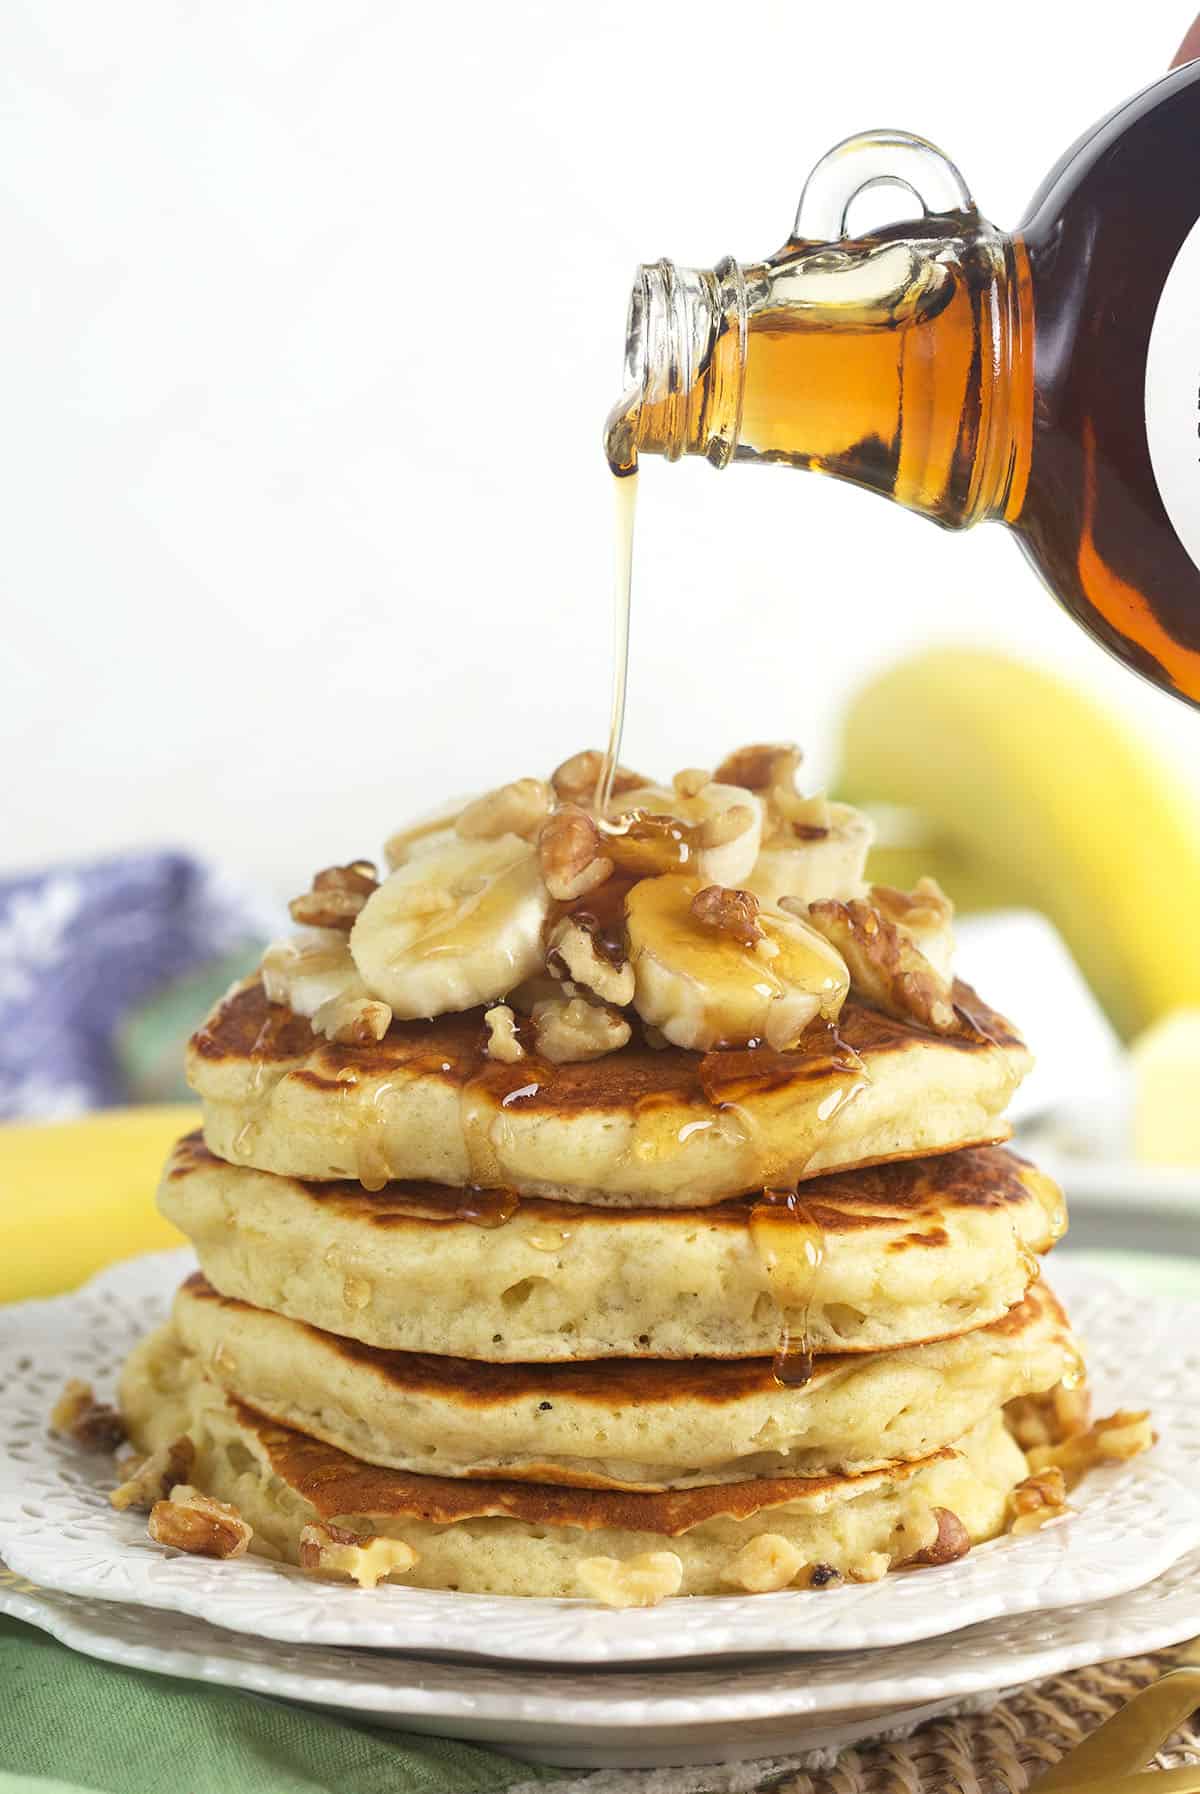 Syrup is being poured all over a stack of garnished banana pancakes.